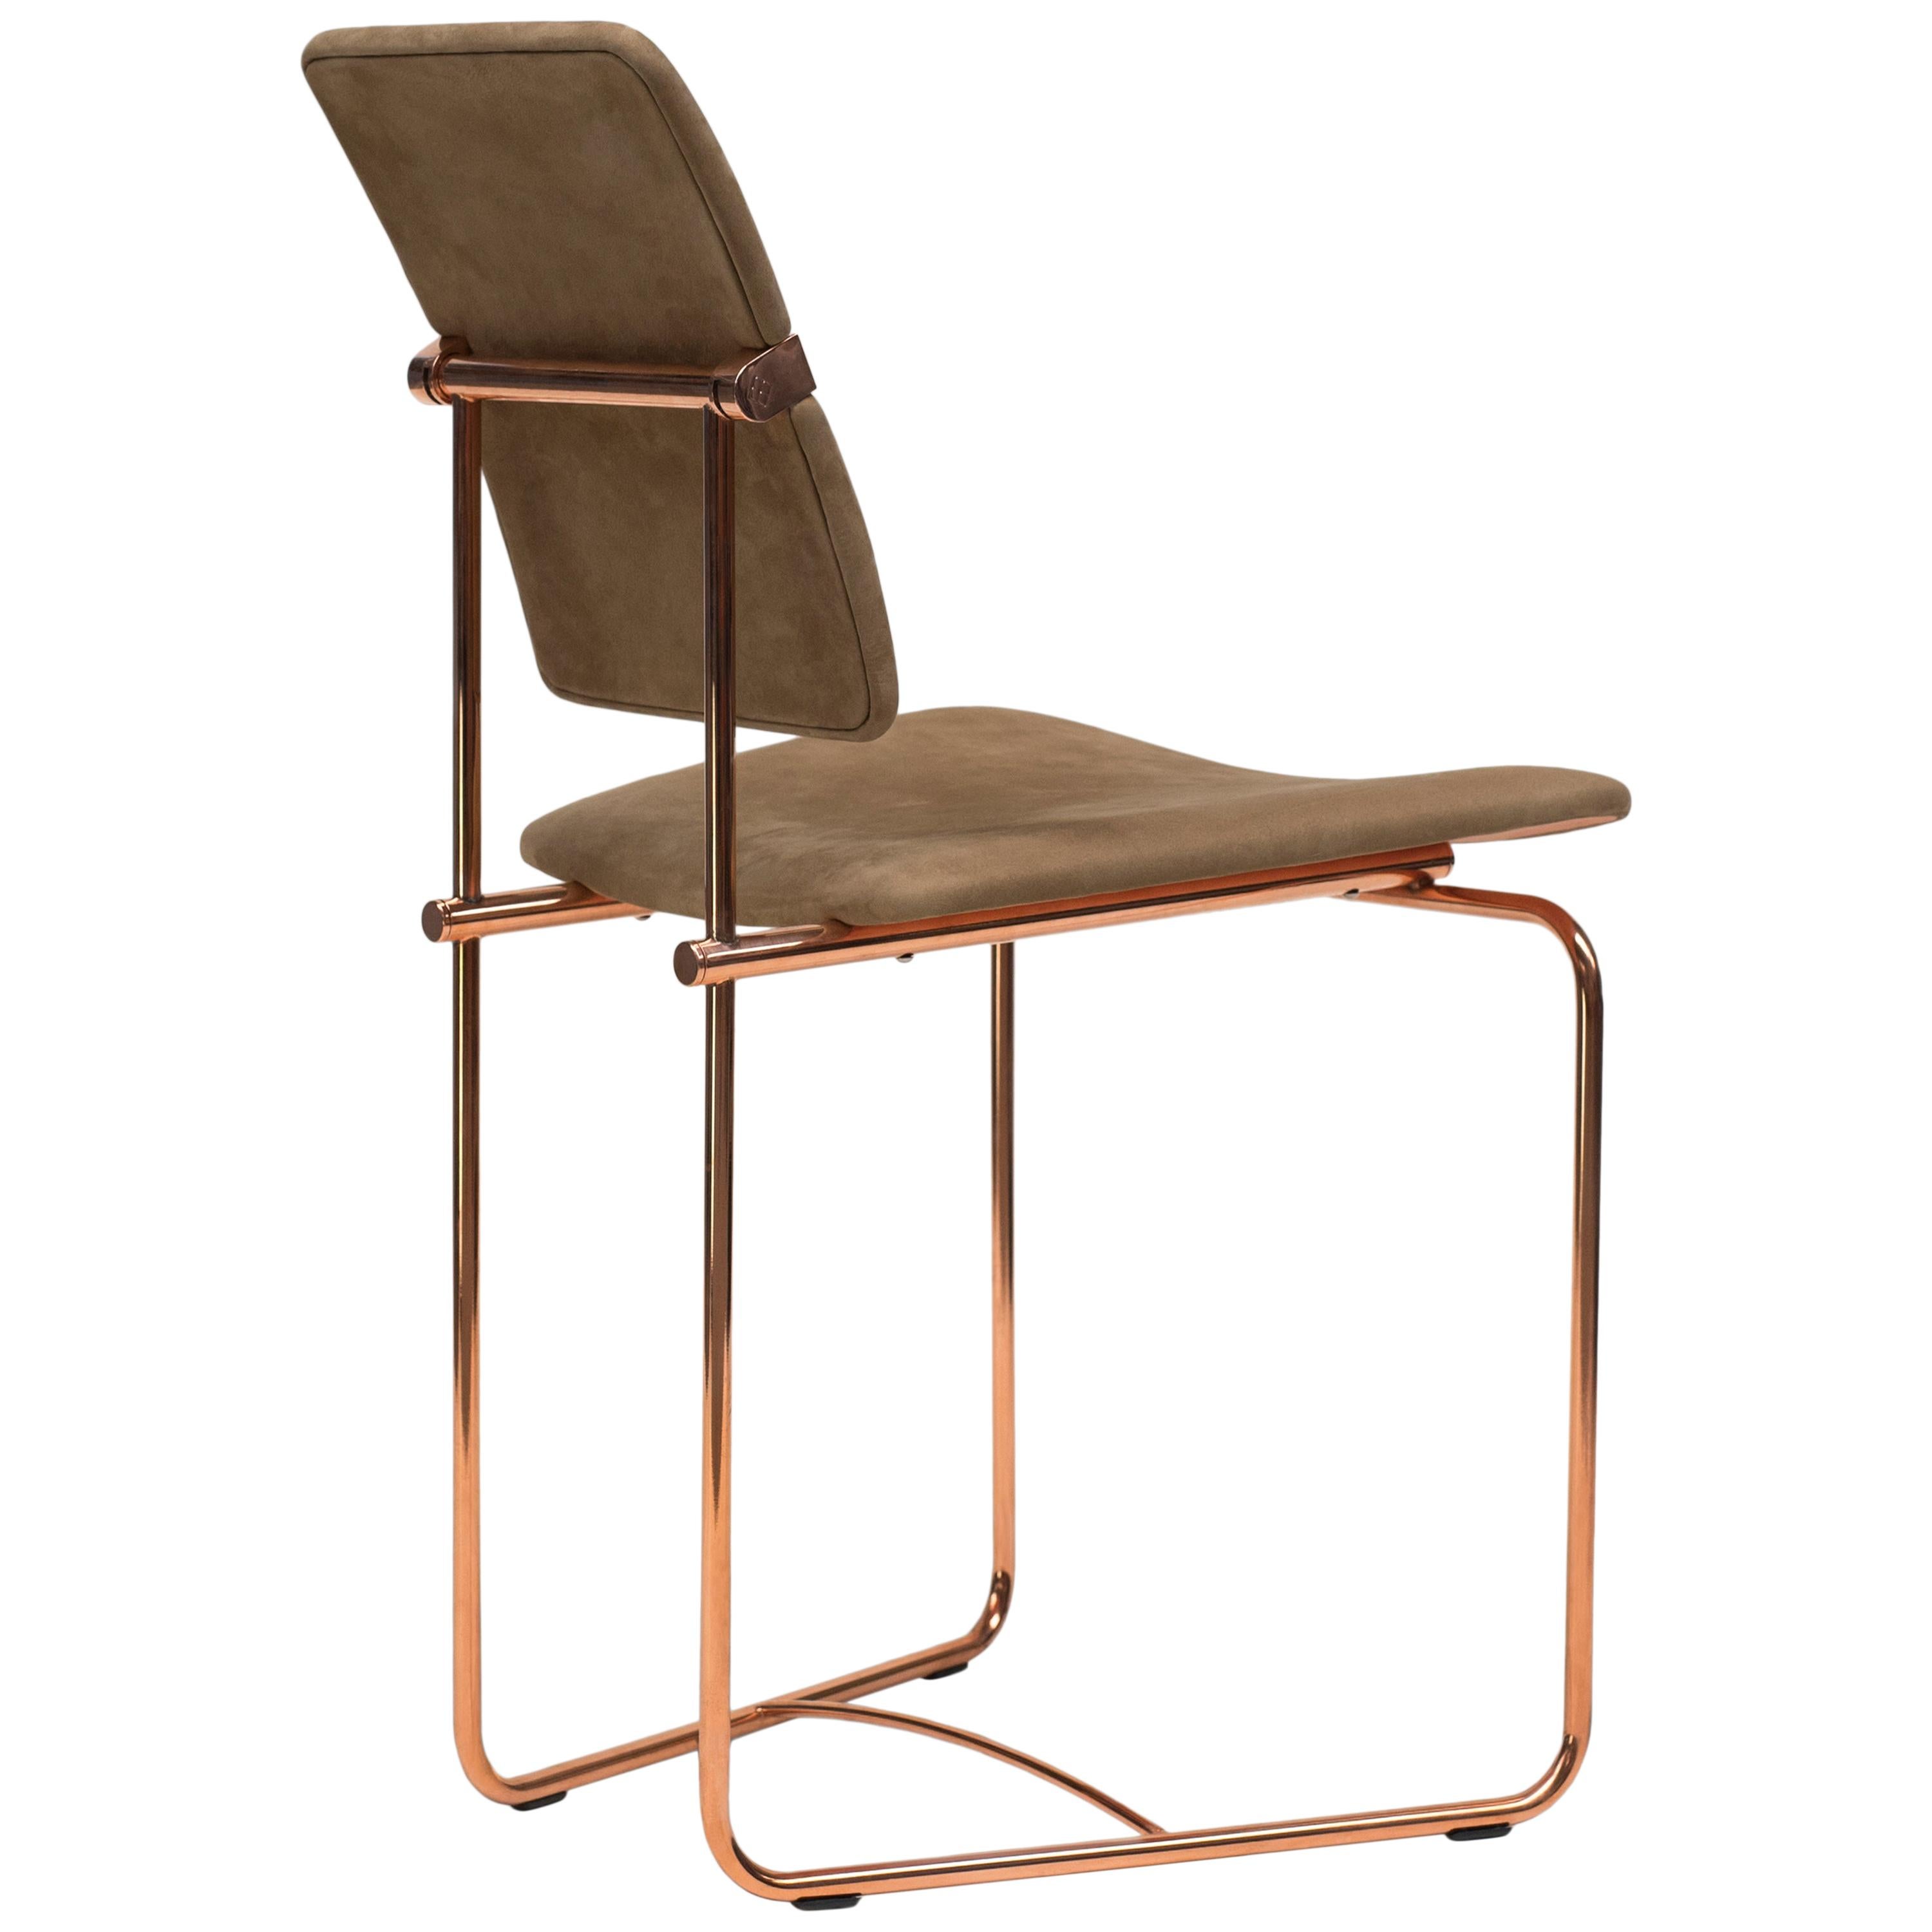 Peter Ghyczy Chair Urban 'S02' Copper / Fabric Limited Edition